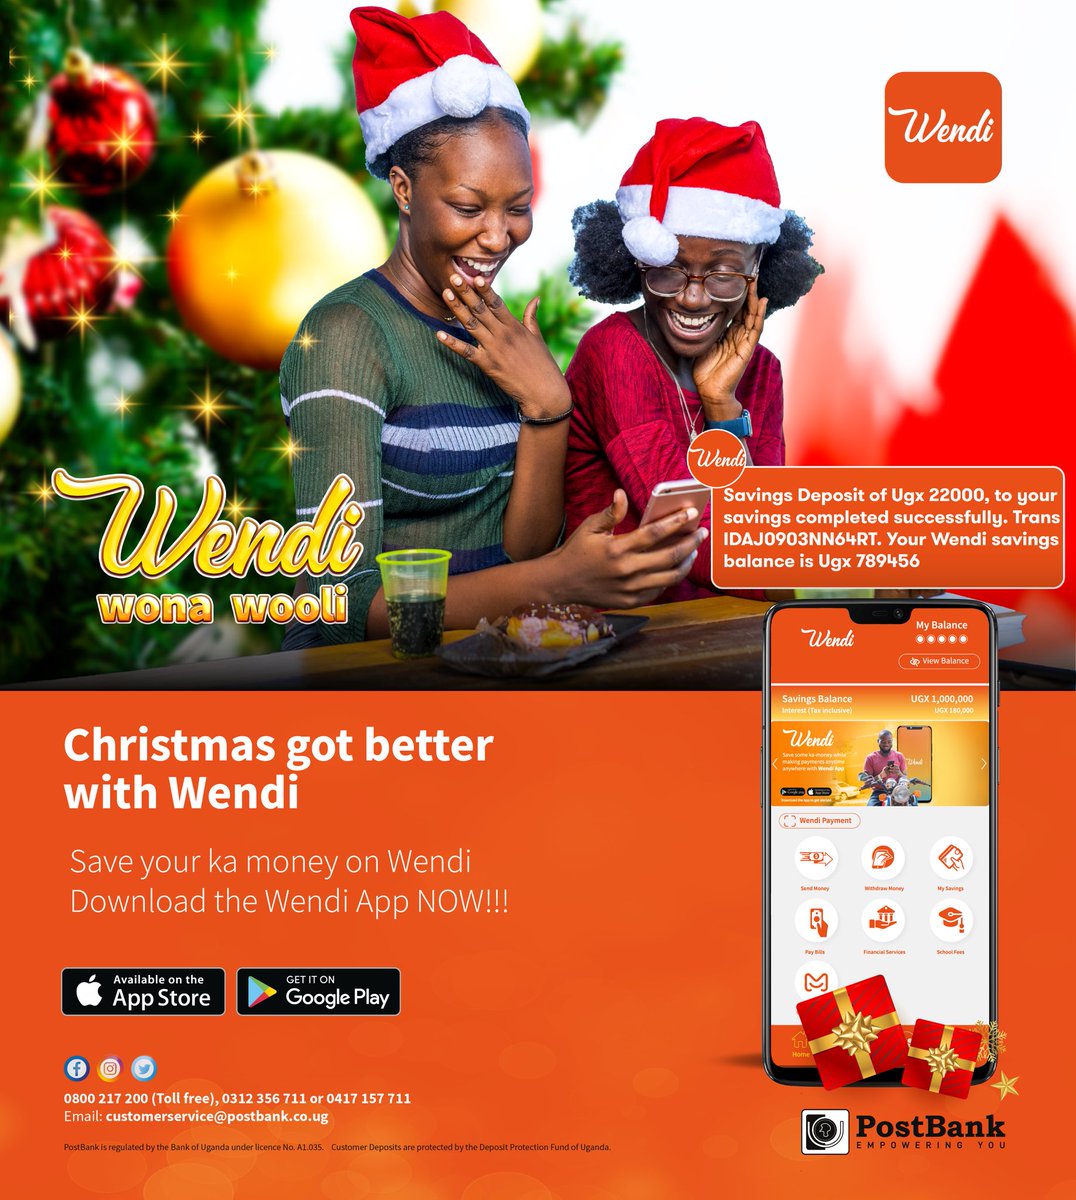 This Christmas, give yourself the gift of financial freedom! Download Wendi today and start saving for what matters. #WendiWonaWooli